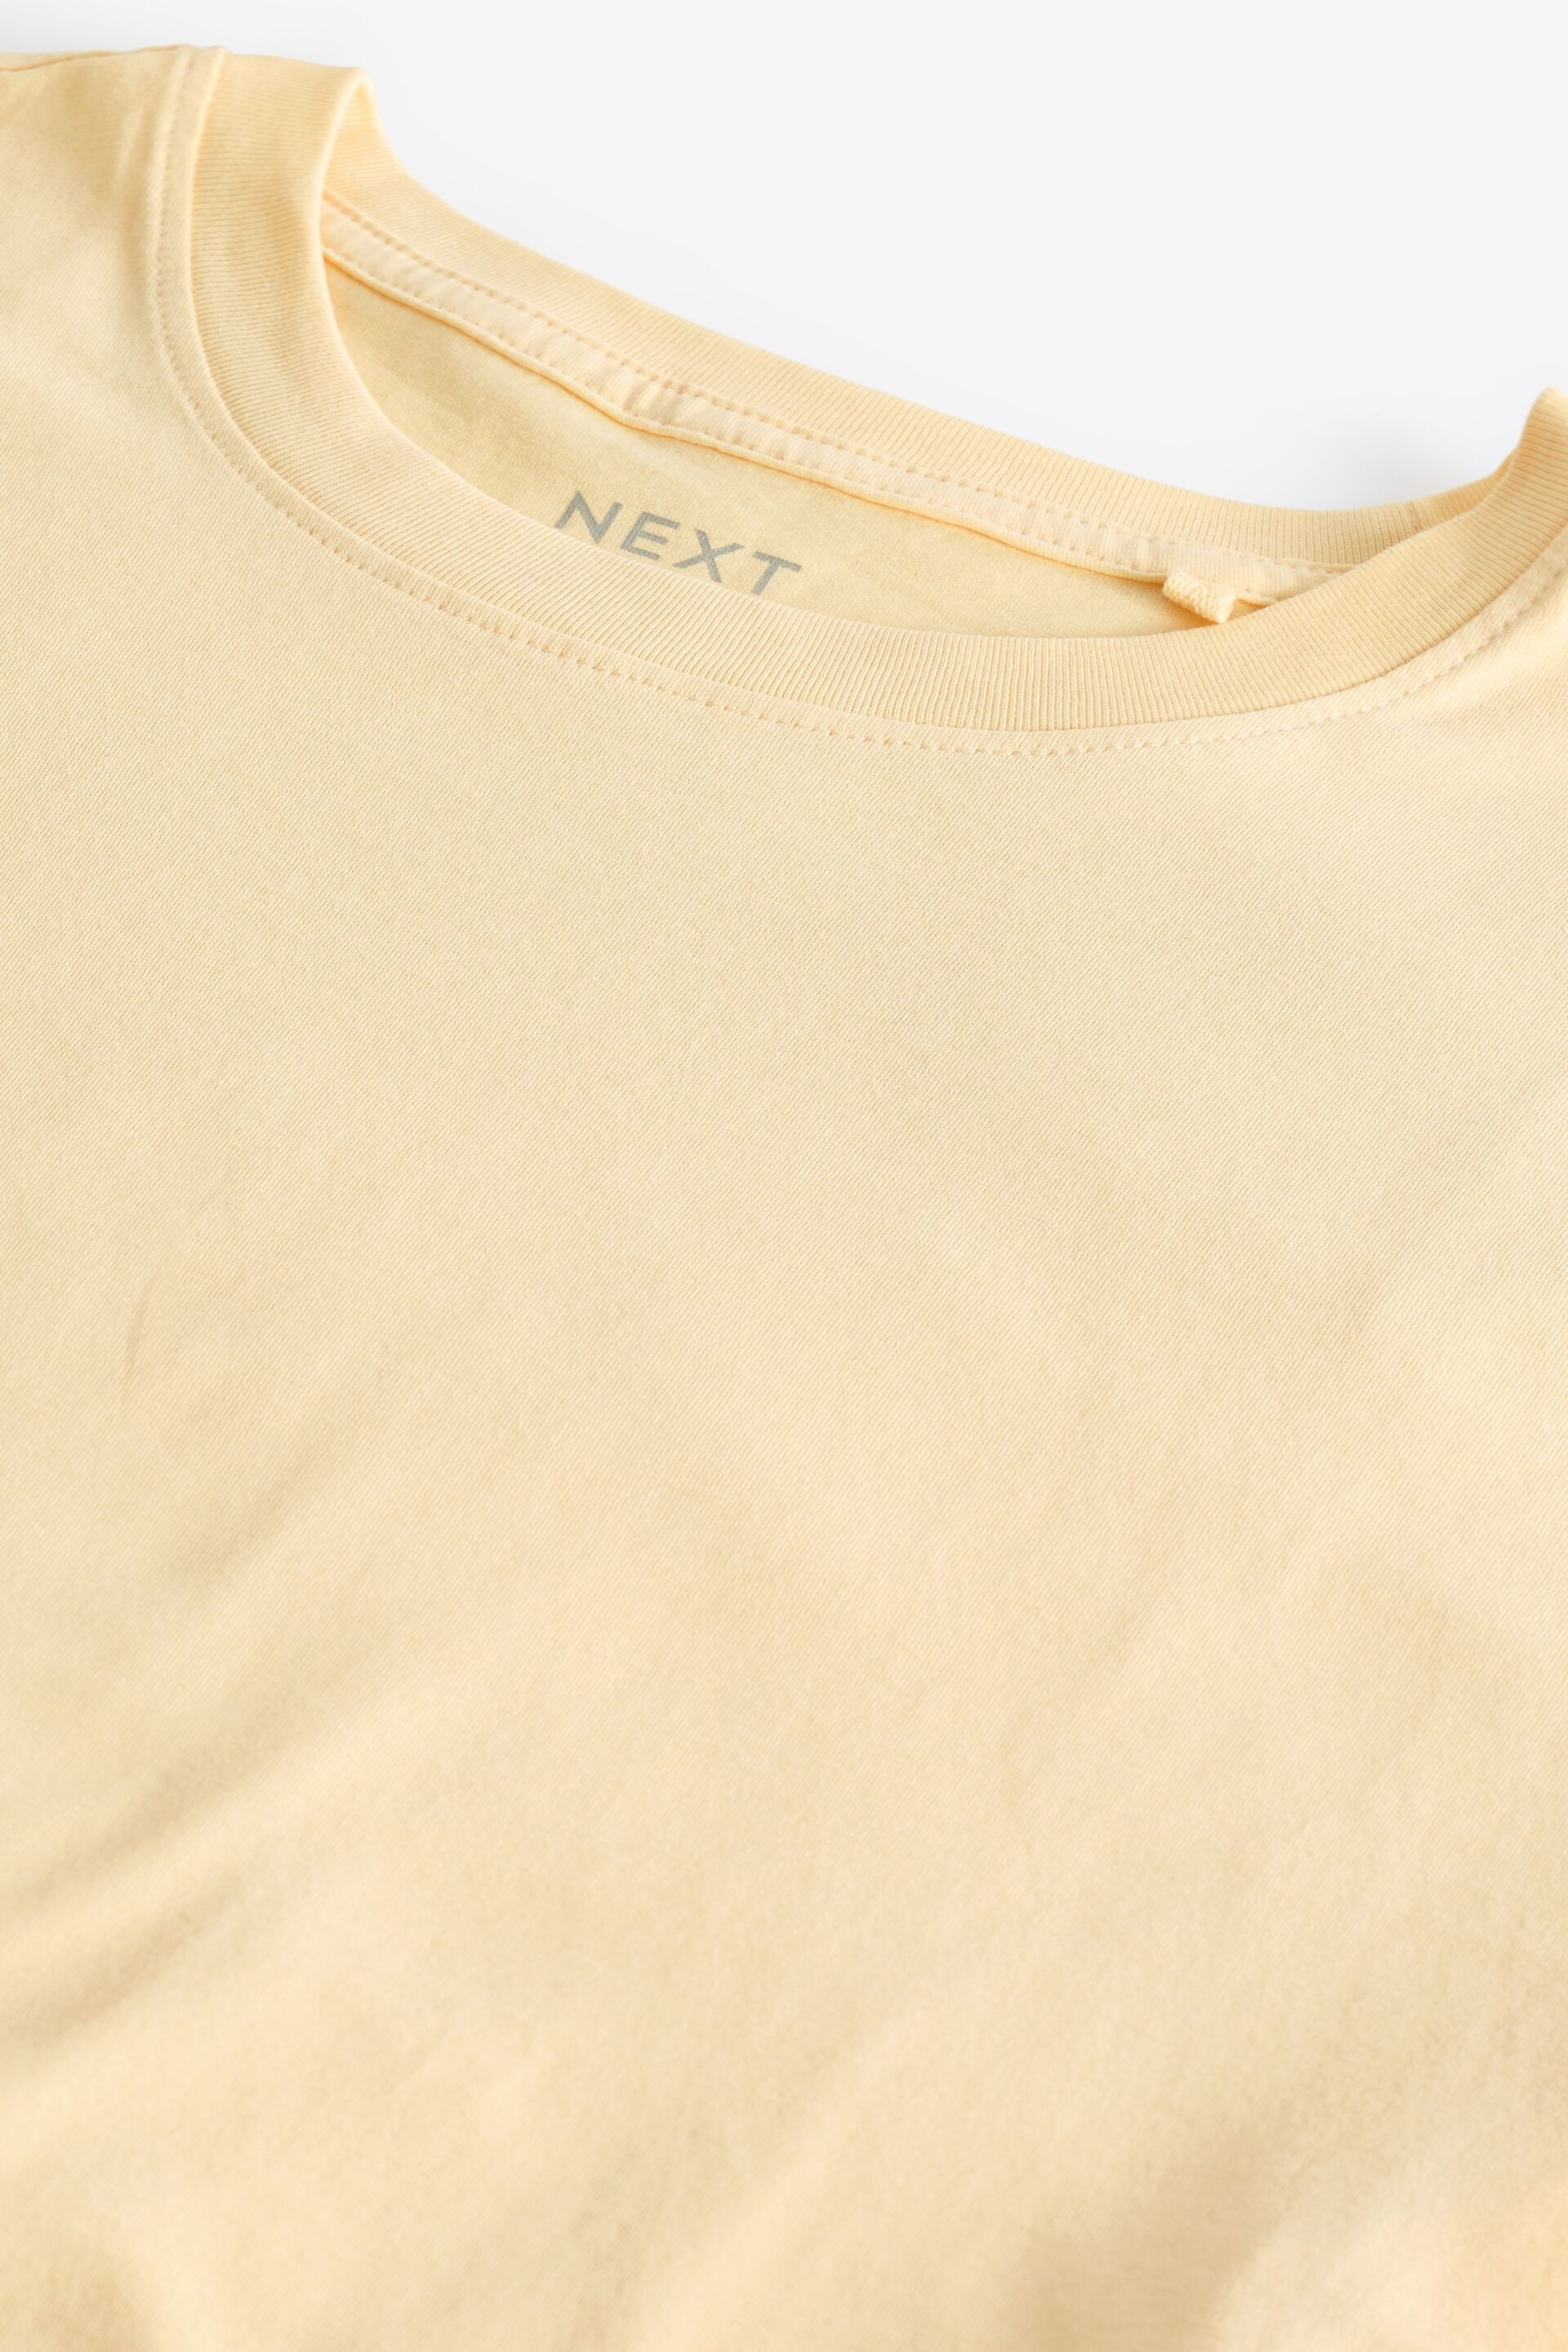 Bright Yellow Regular Fit Essential Crew Neck T-Shirt - Image 6 of 7